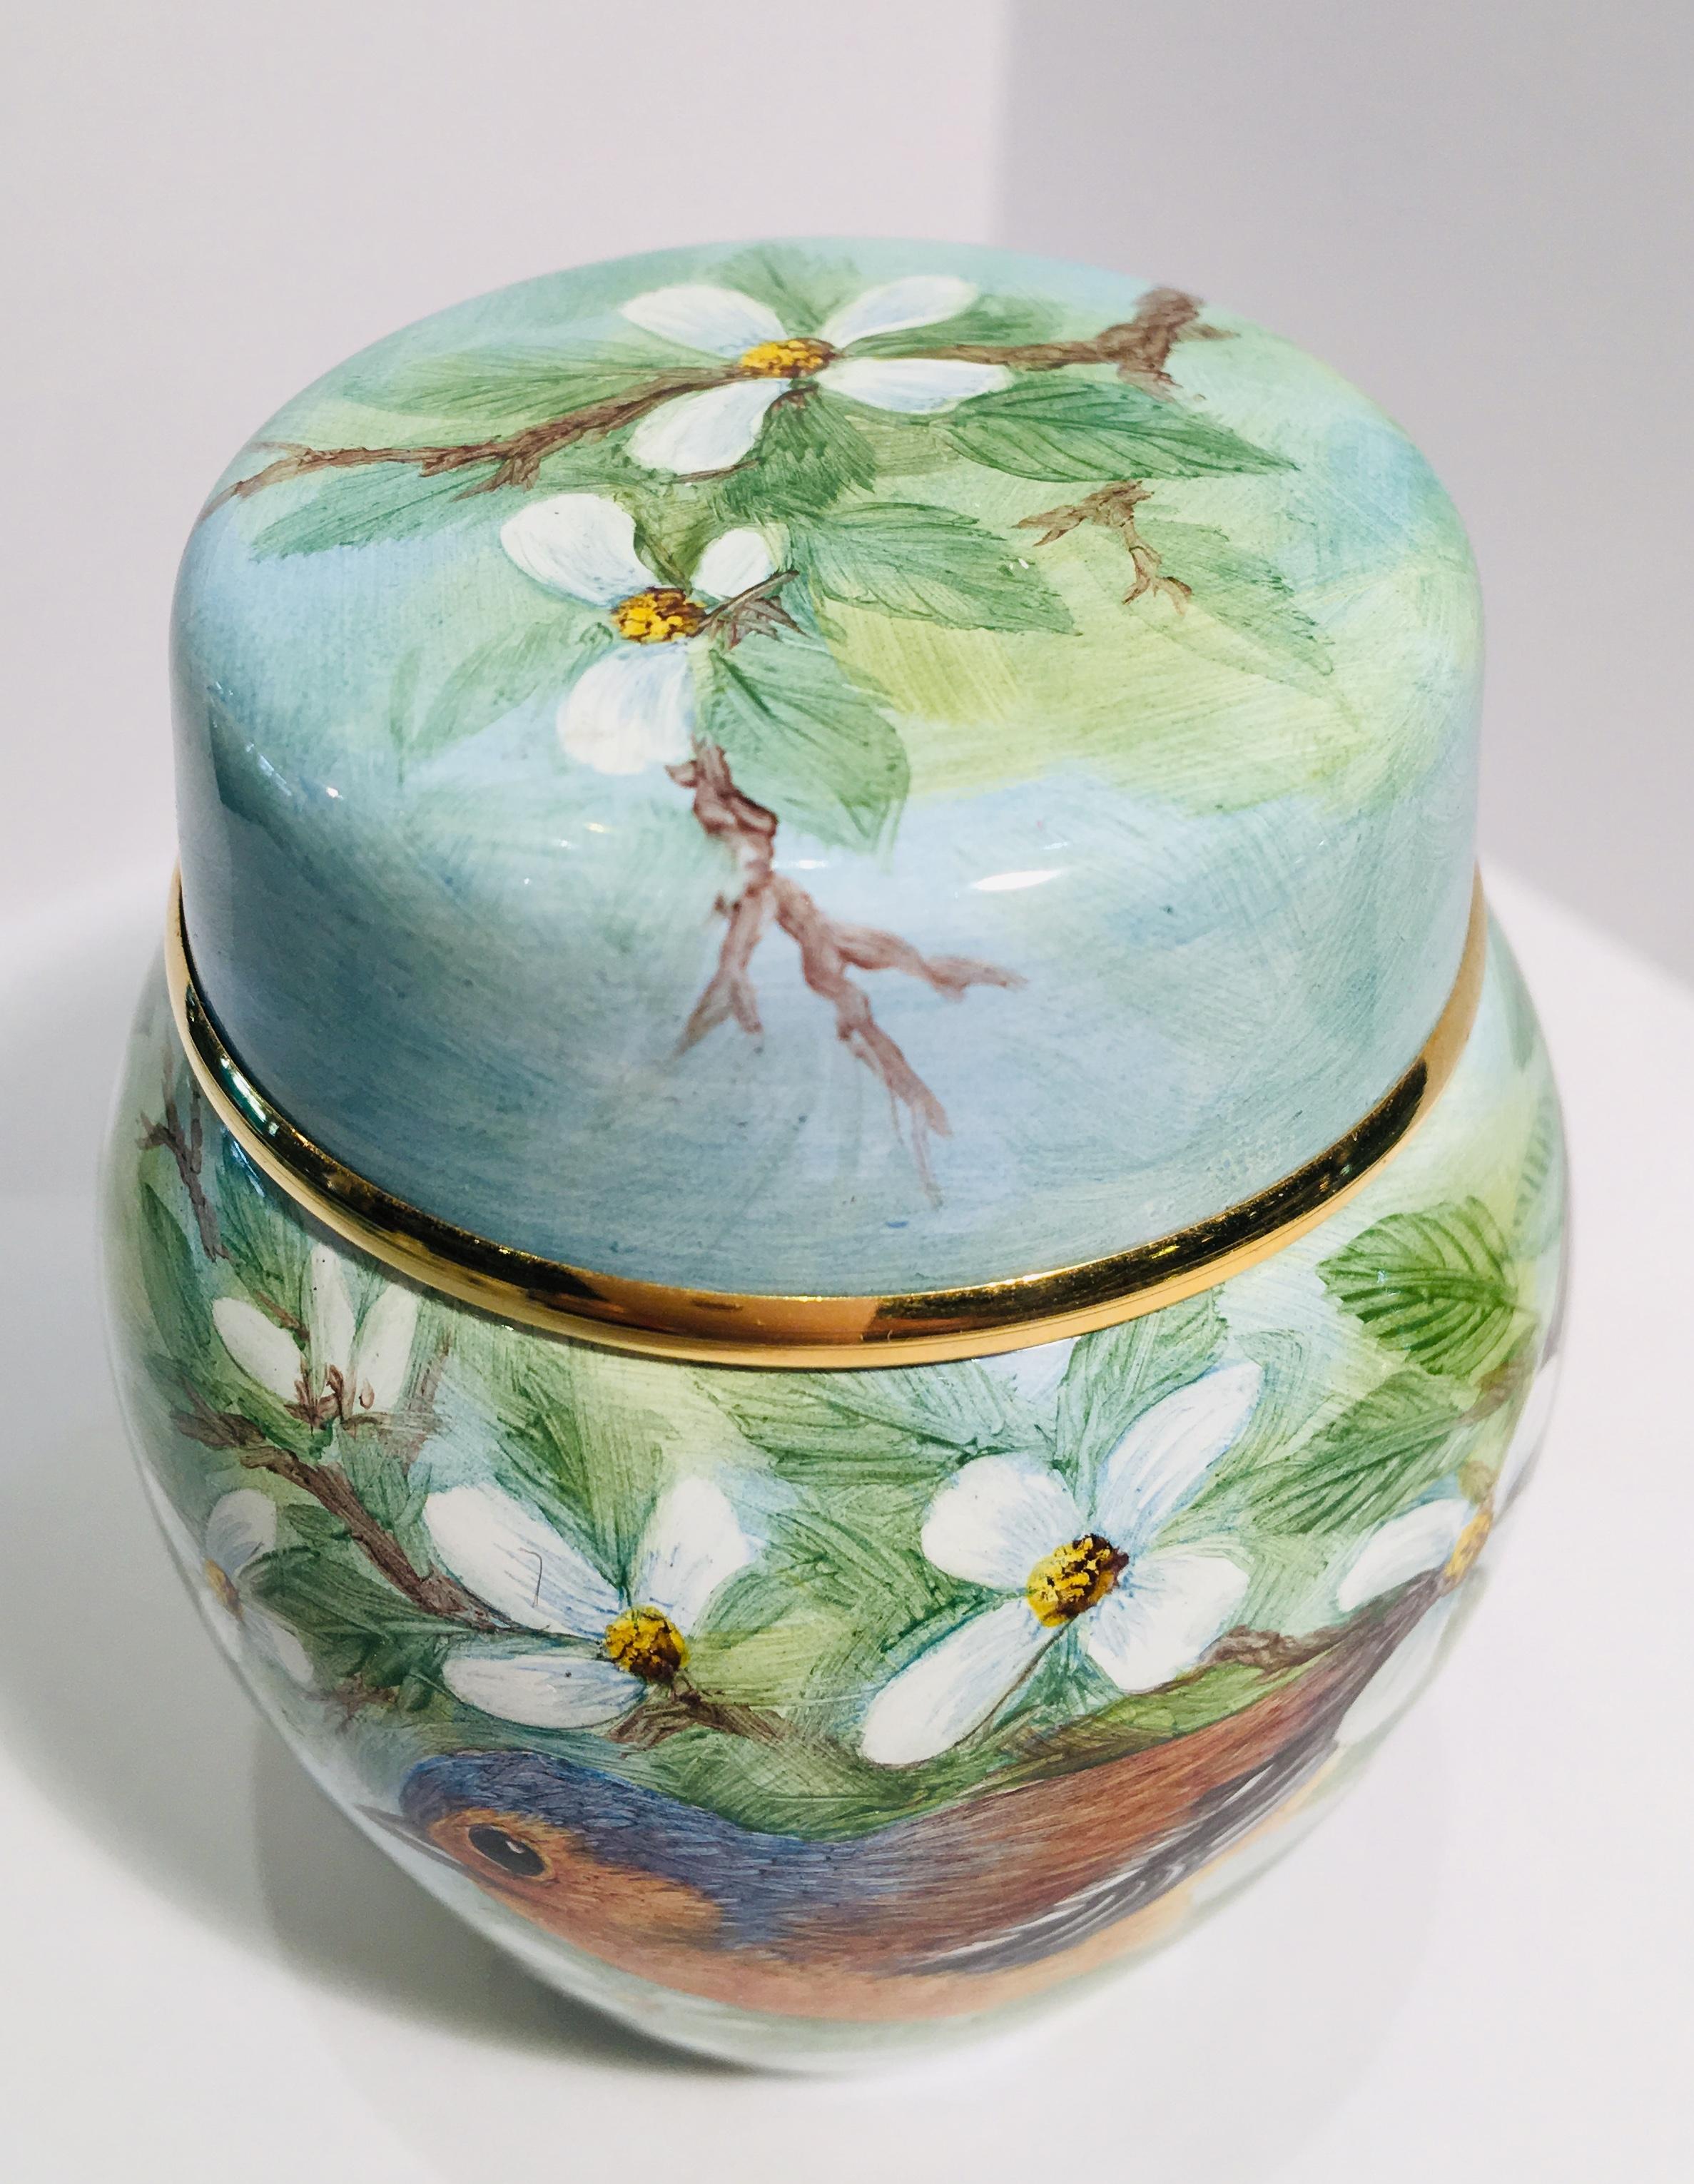 Rare Exquisite Moorcroft Enamel and Gold Limited Edition Miniature Ginger Jar 1